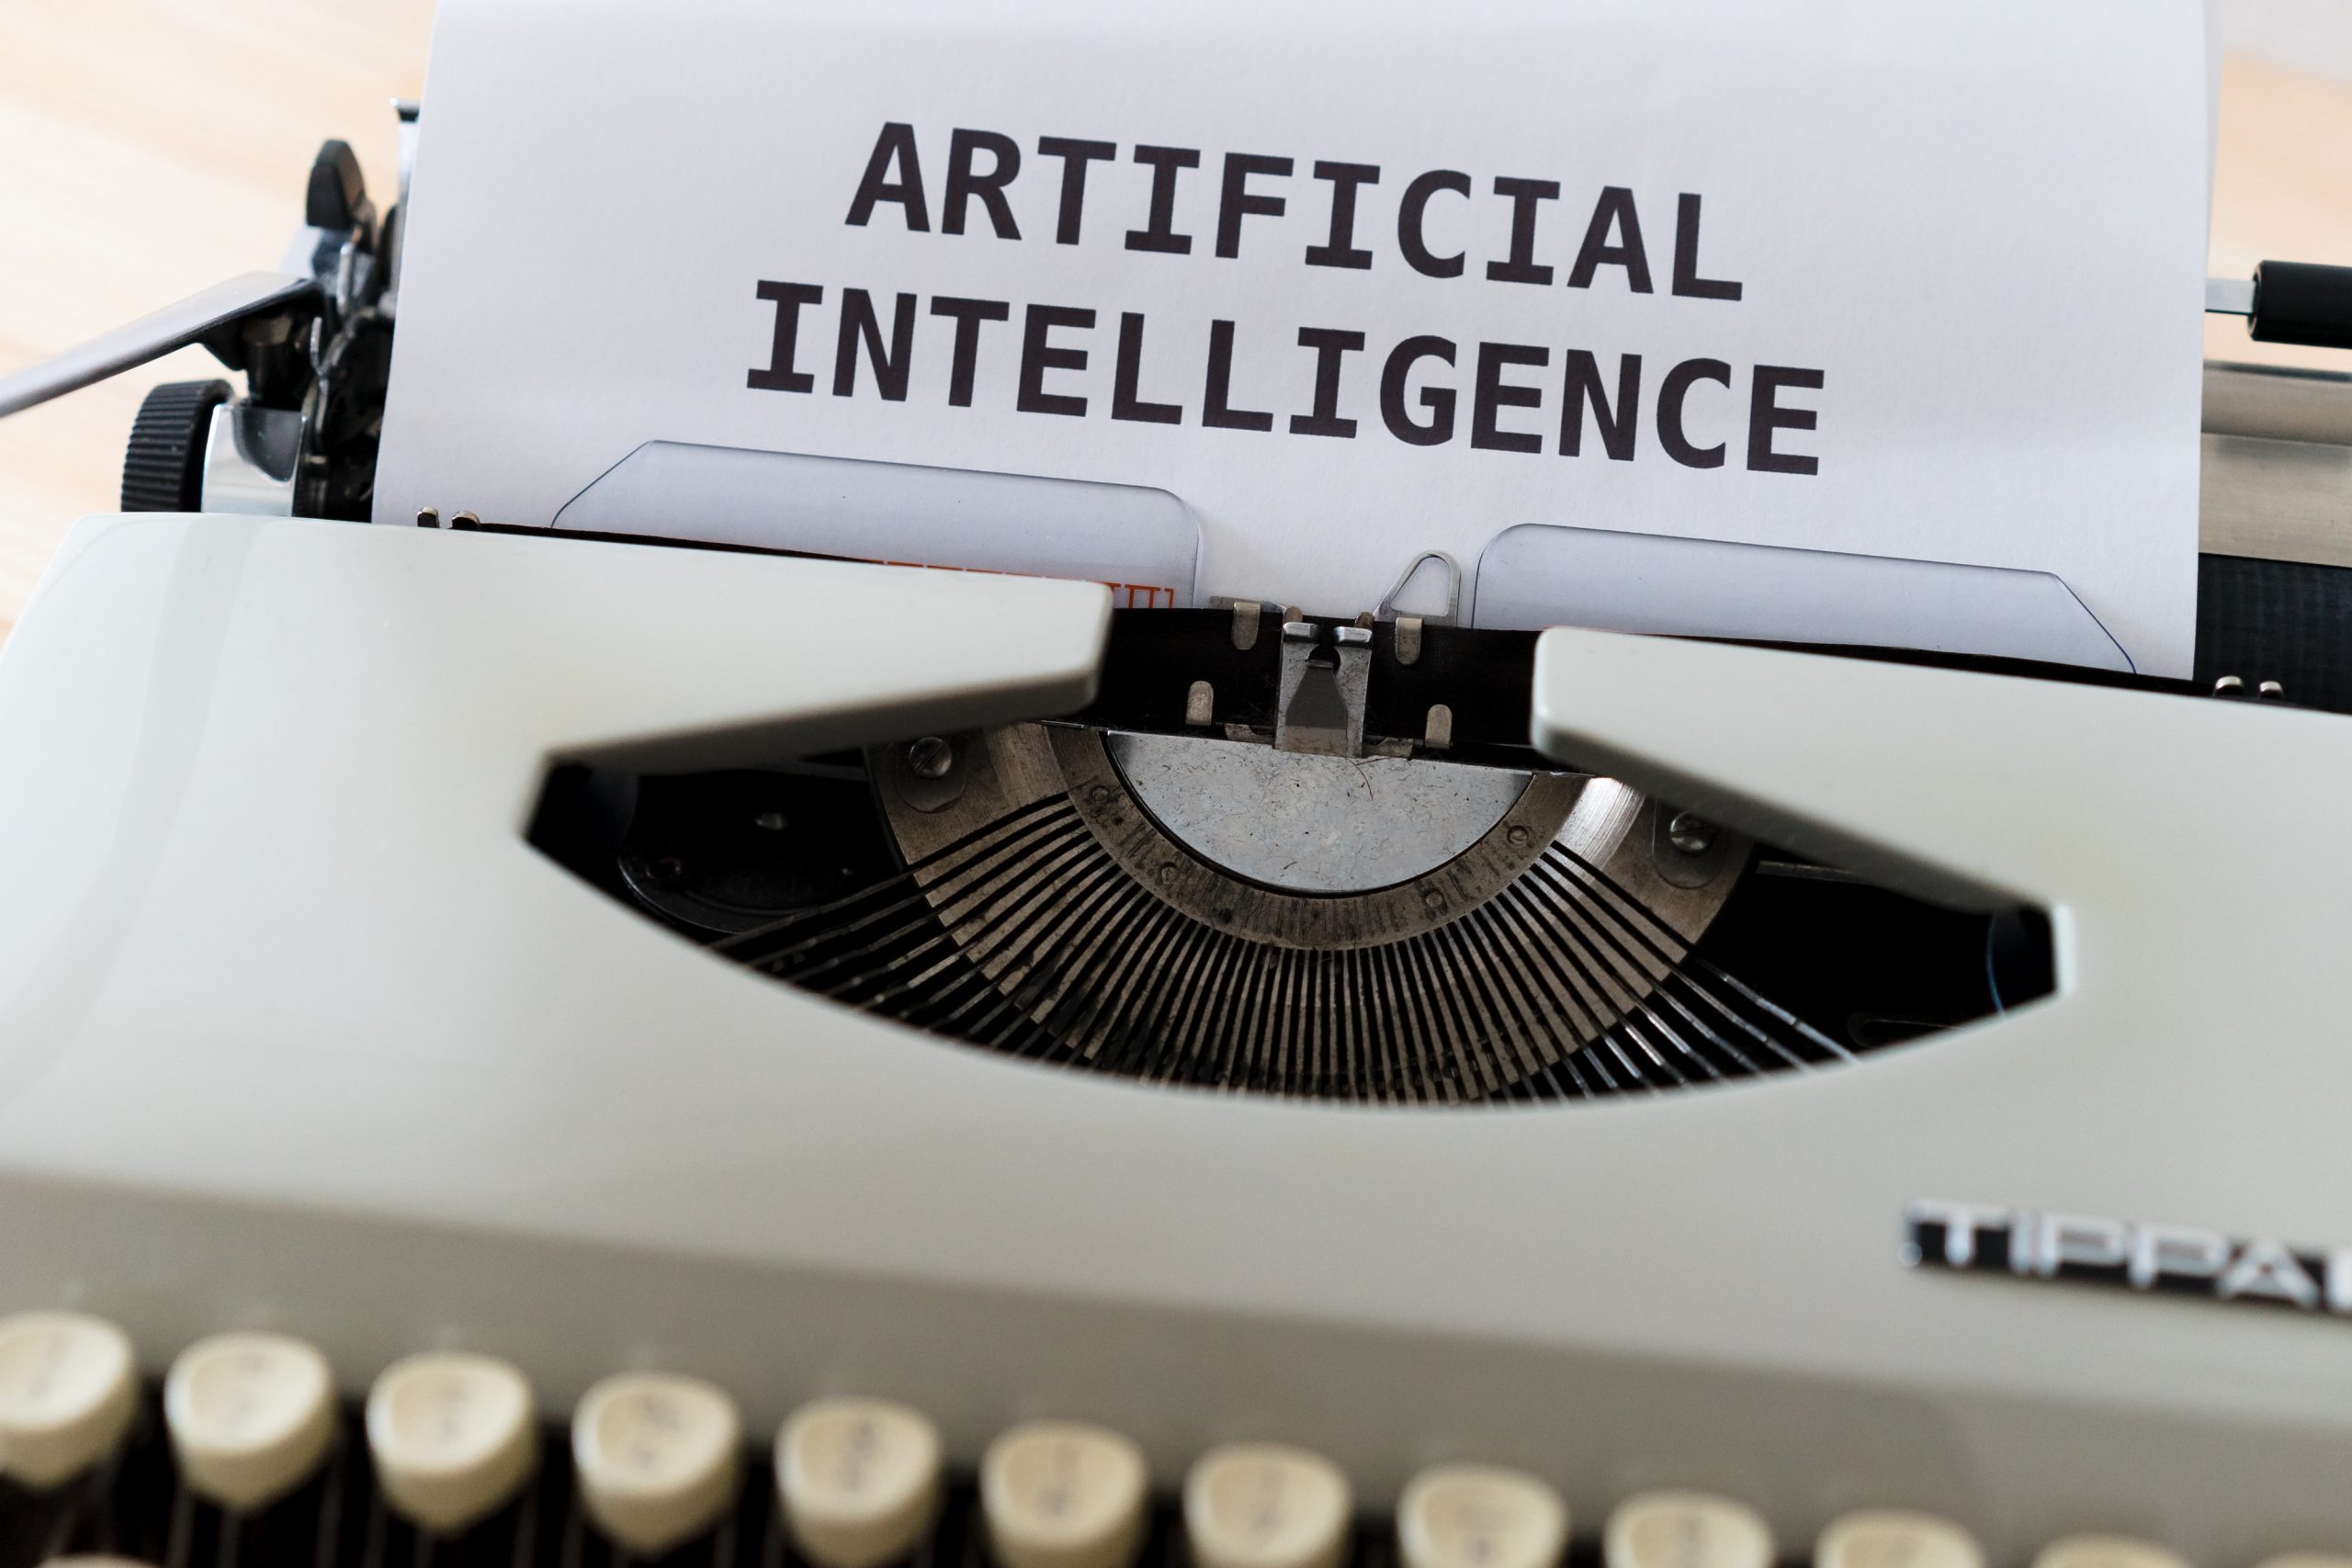 Artificial Intelligence and Typewriter